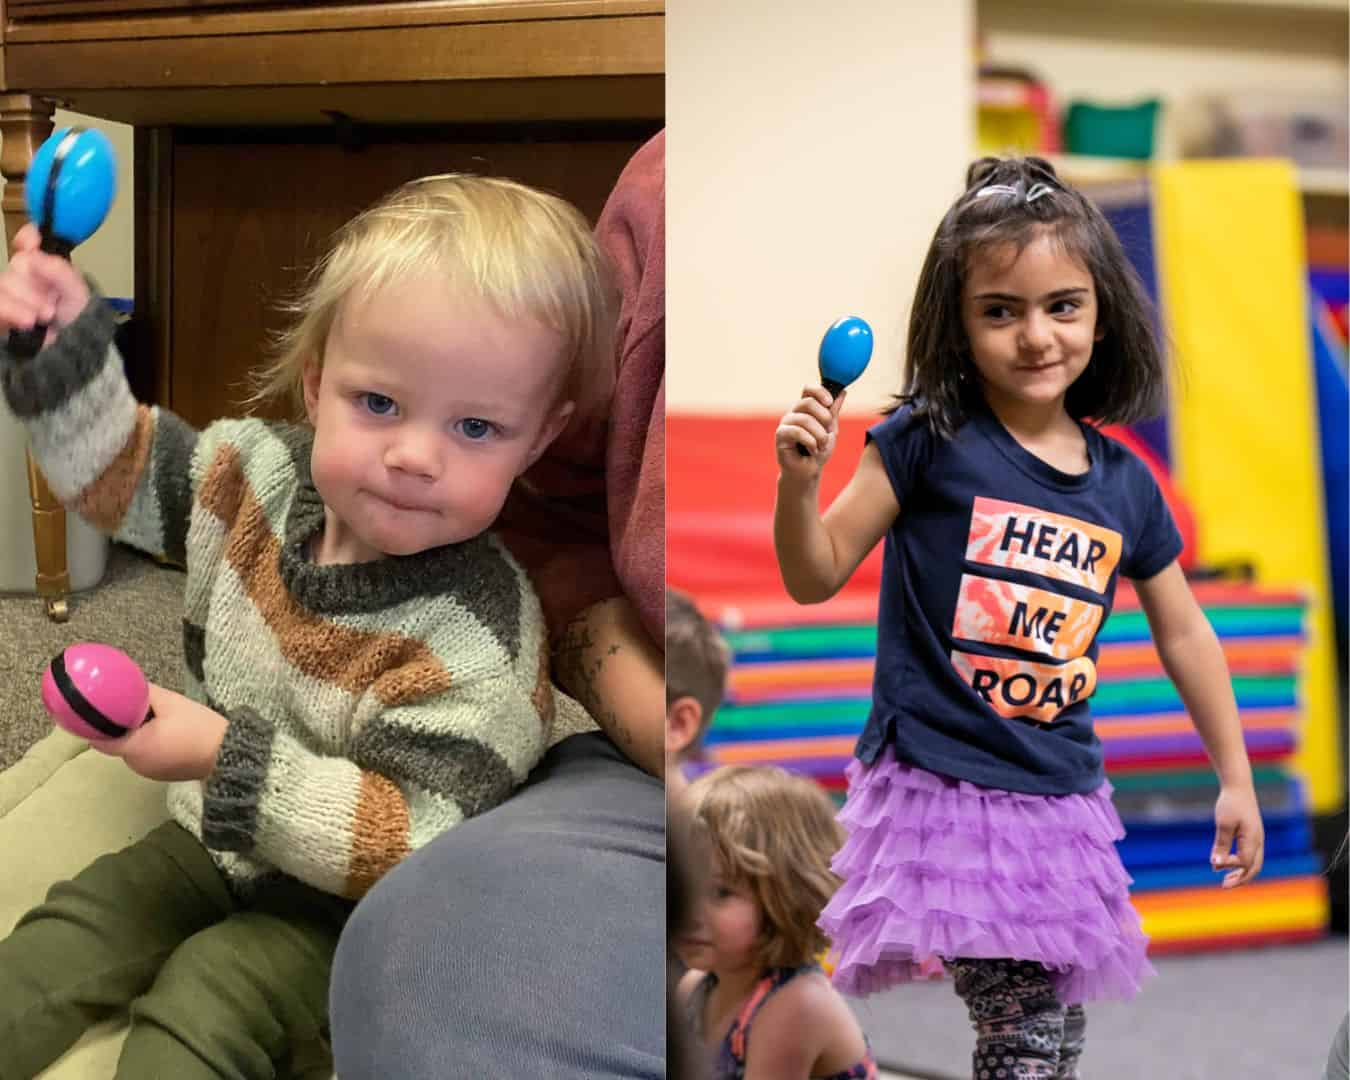 A collage of two toddlers in music classes at Swallow Hill Music in Denver - the boy on the left is sitting, has blonde hair, and is shaking a blue maraca in one hand and a pink maraca in the other and is wearing a sweater, while the Latina girl on the right is shaking a blue maraca while standing and wearing a shirt that says "Hear Me Roar"